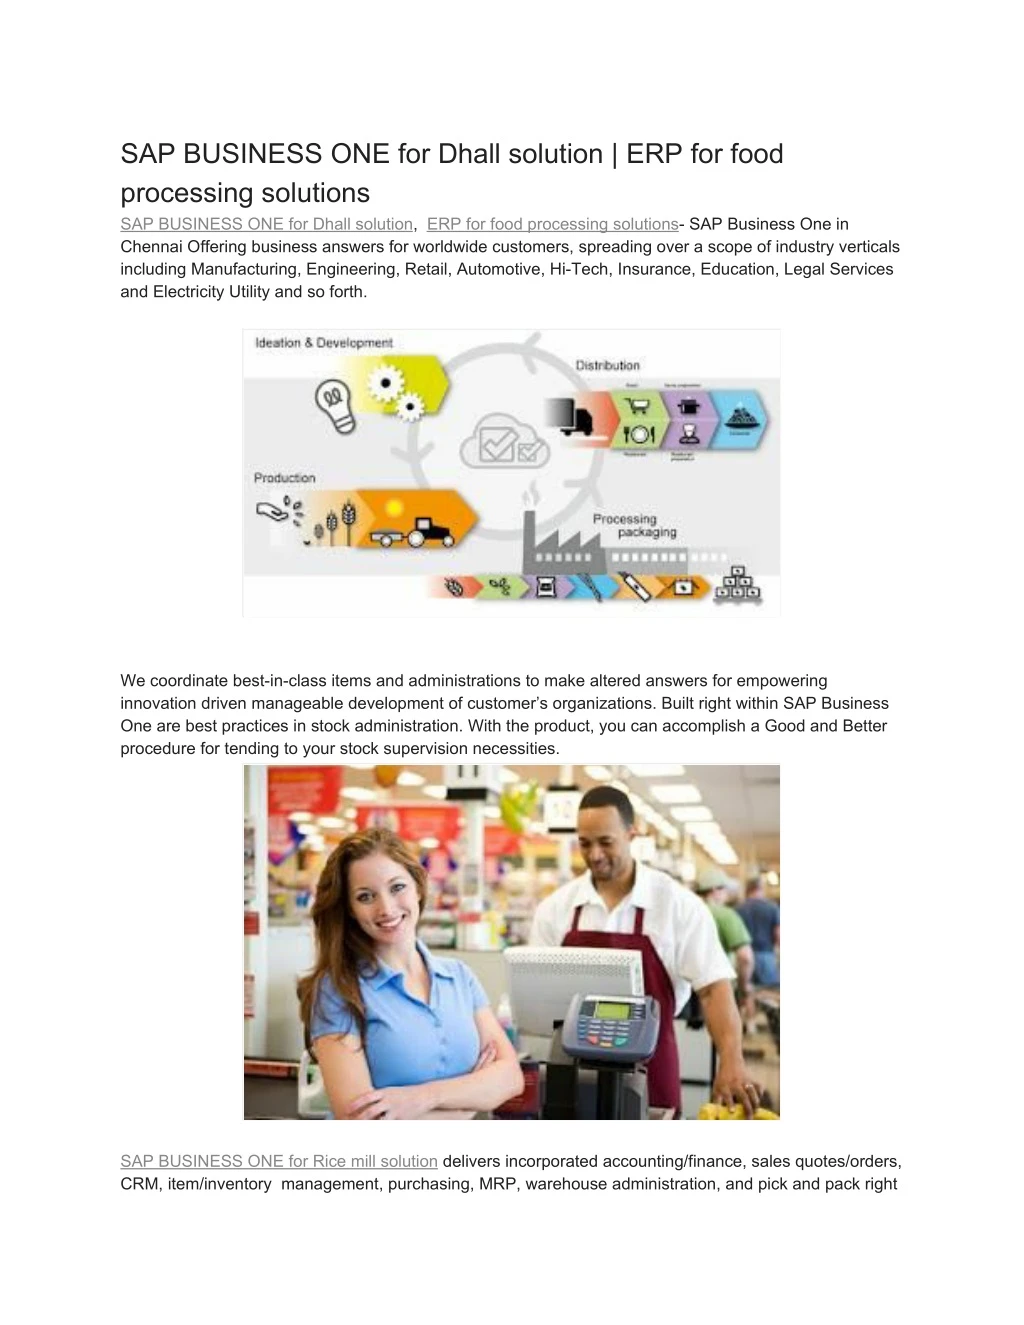 sap business one for dhall solution erp for food